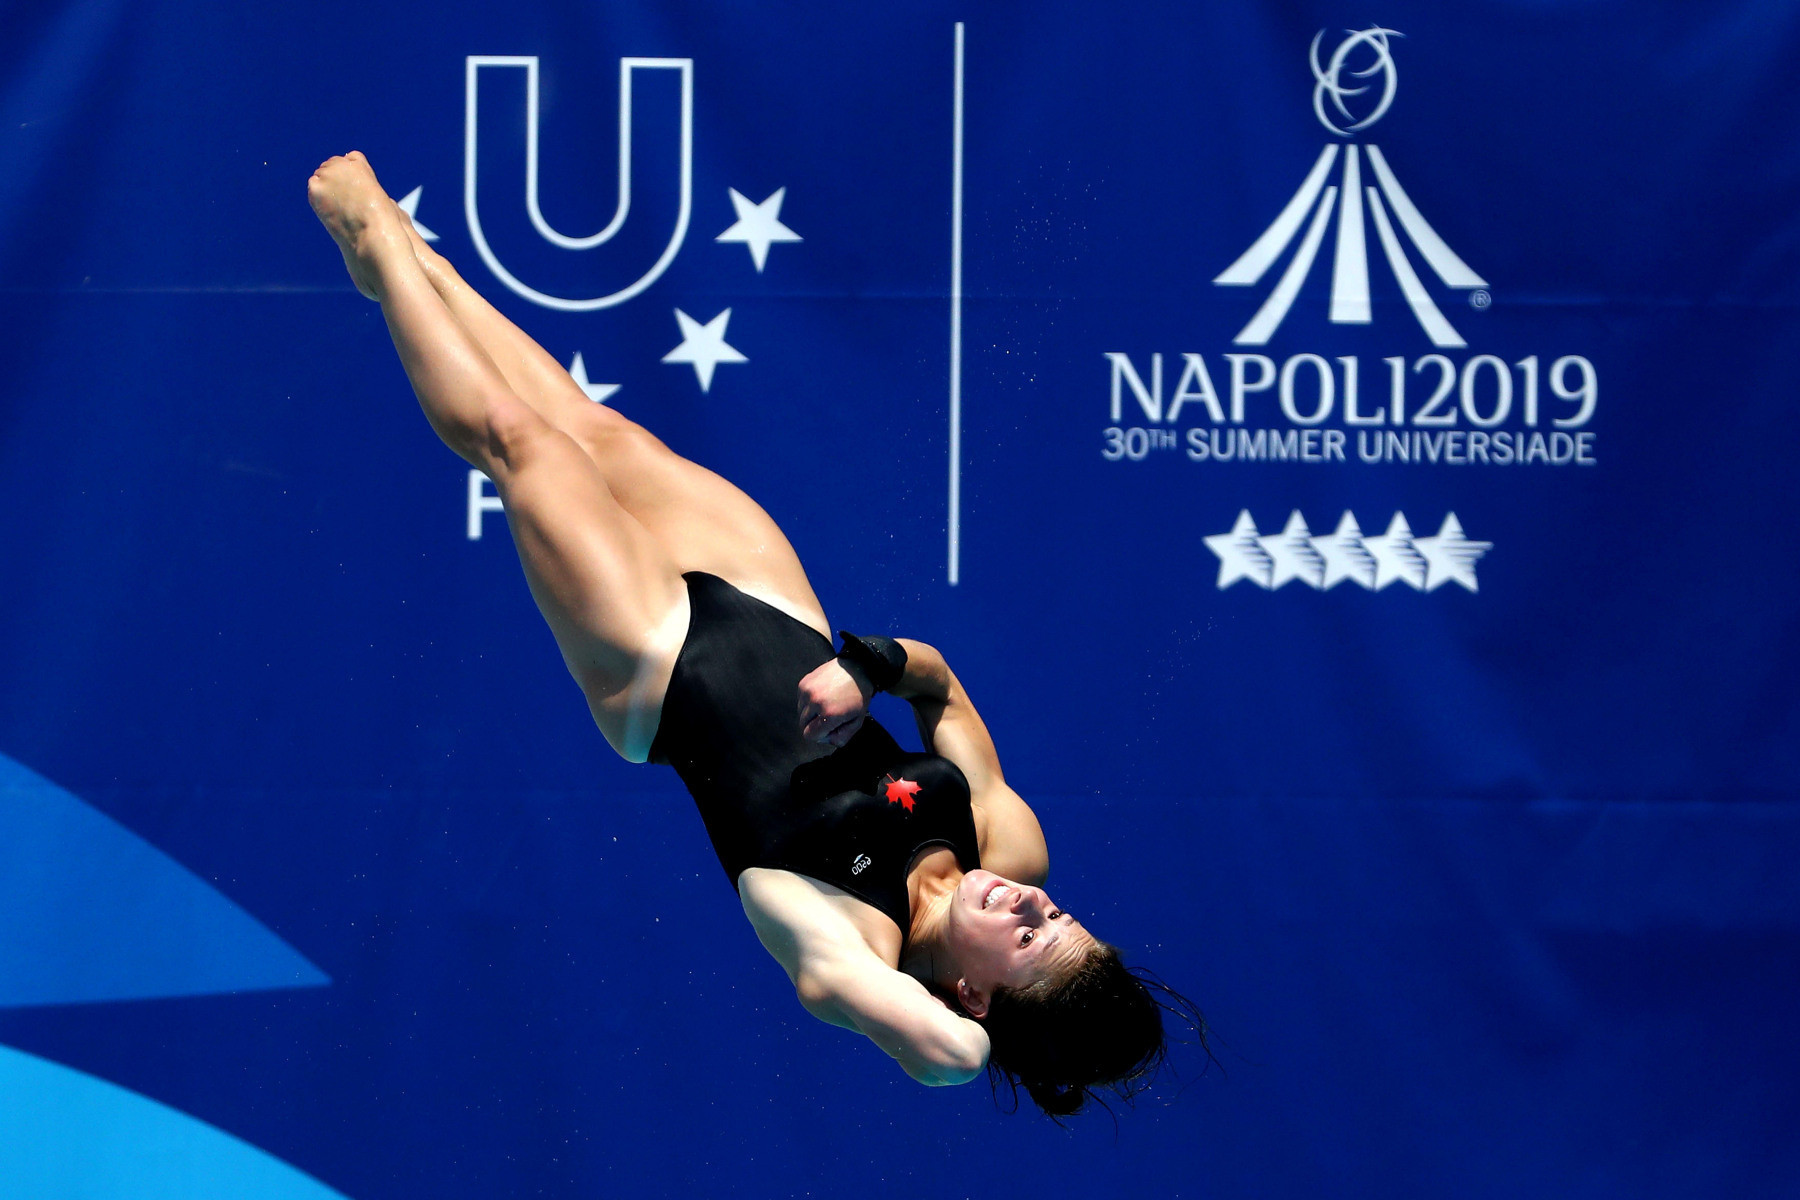 Four sets of medals were awarded in the diving as it got under way ©Naples 2019